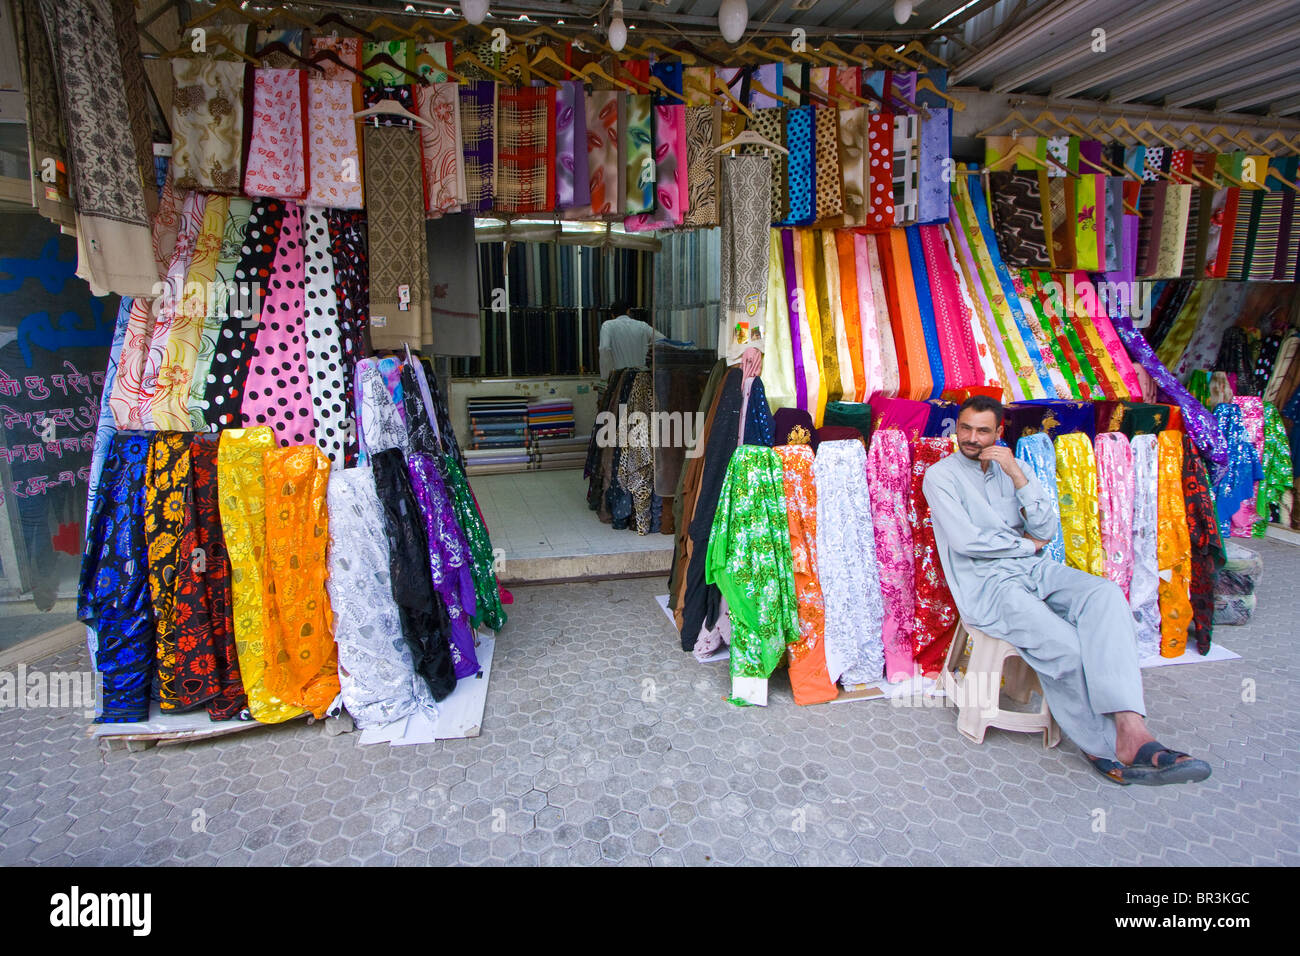 Textile vendors in the Old Souk in Kuwait City, Kuwait Stock Photo